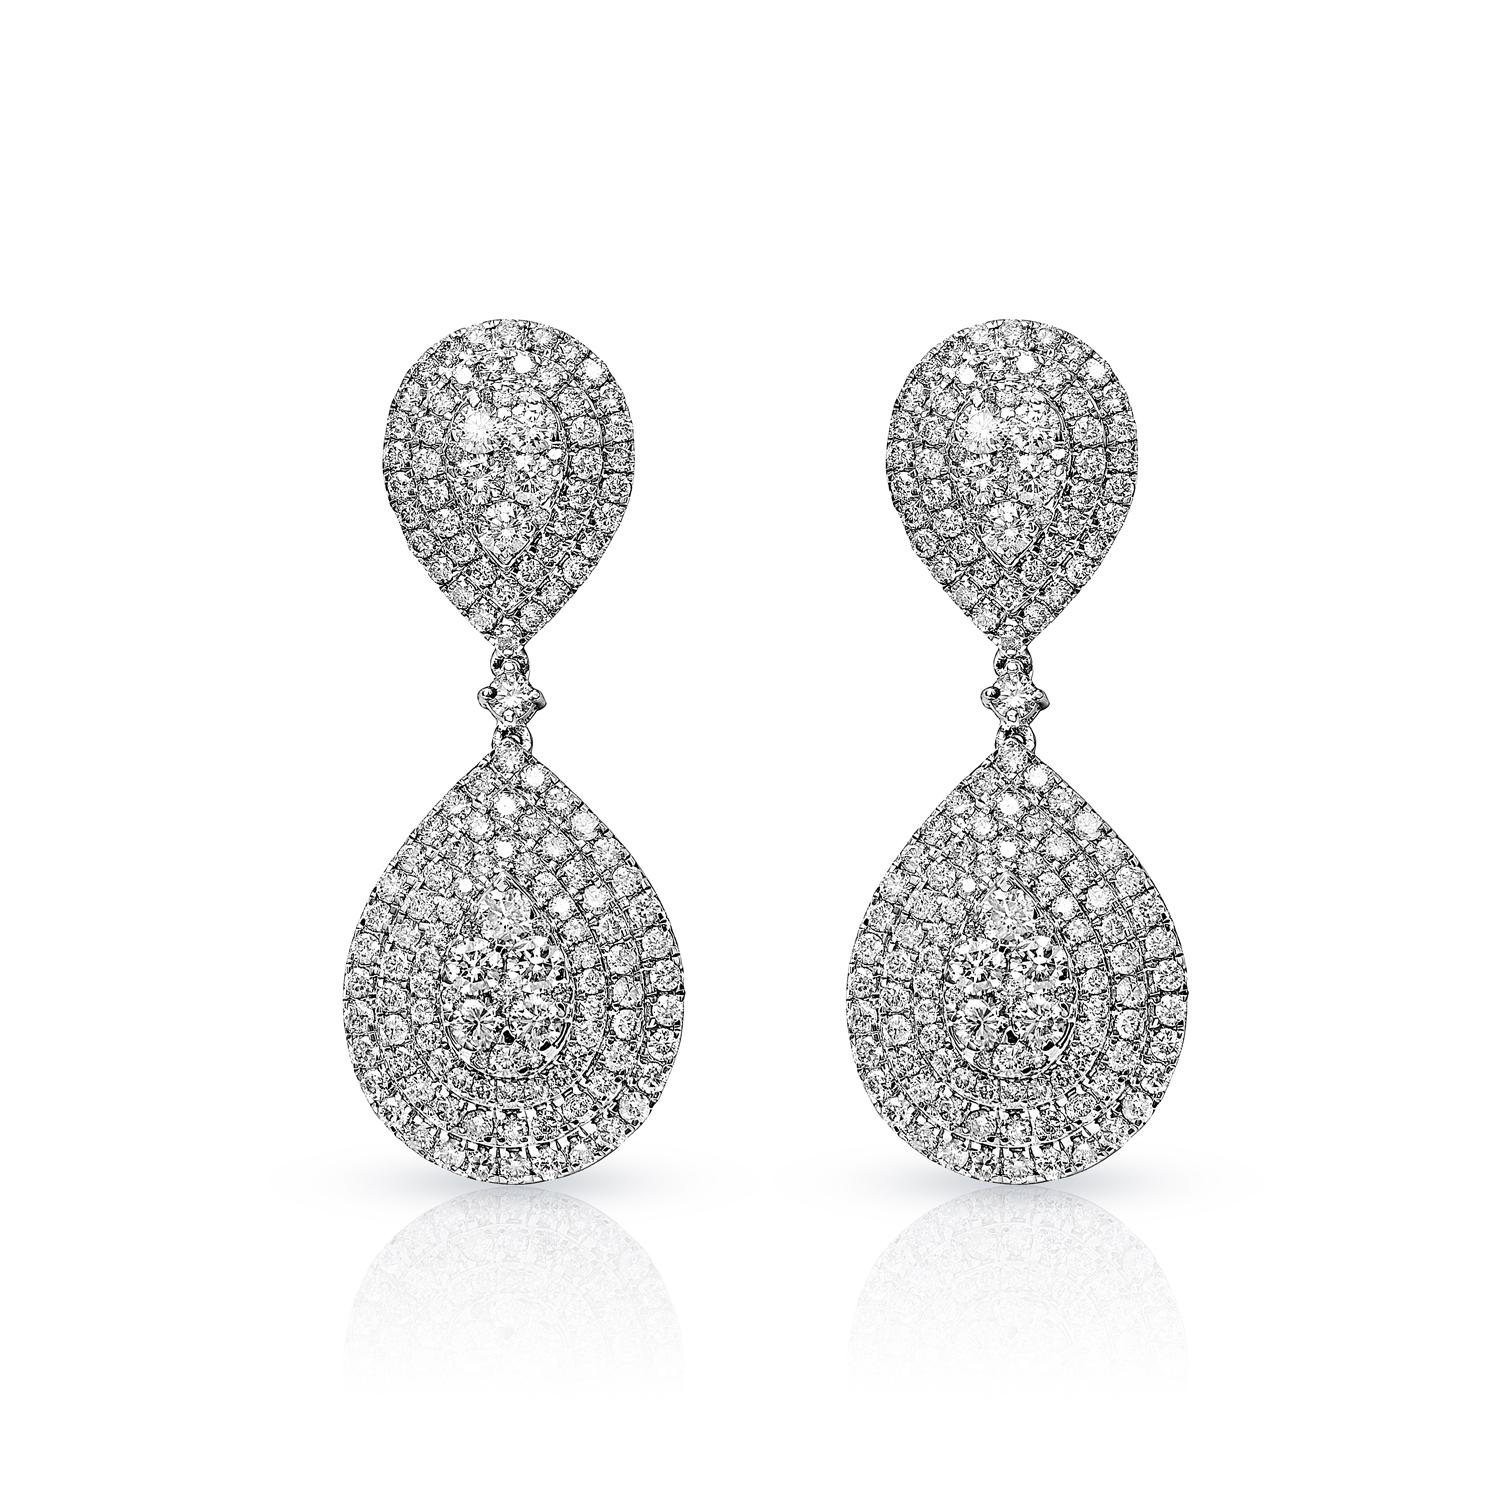 Diamond teardrop earrings for women that are sure to make a statement. These earrings are both modern and elegant, with pave diamonds, creating a highly polished look that is both feminine and strong. The square clear stones add a vintage elegance